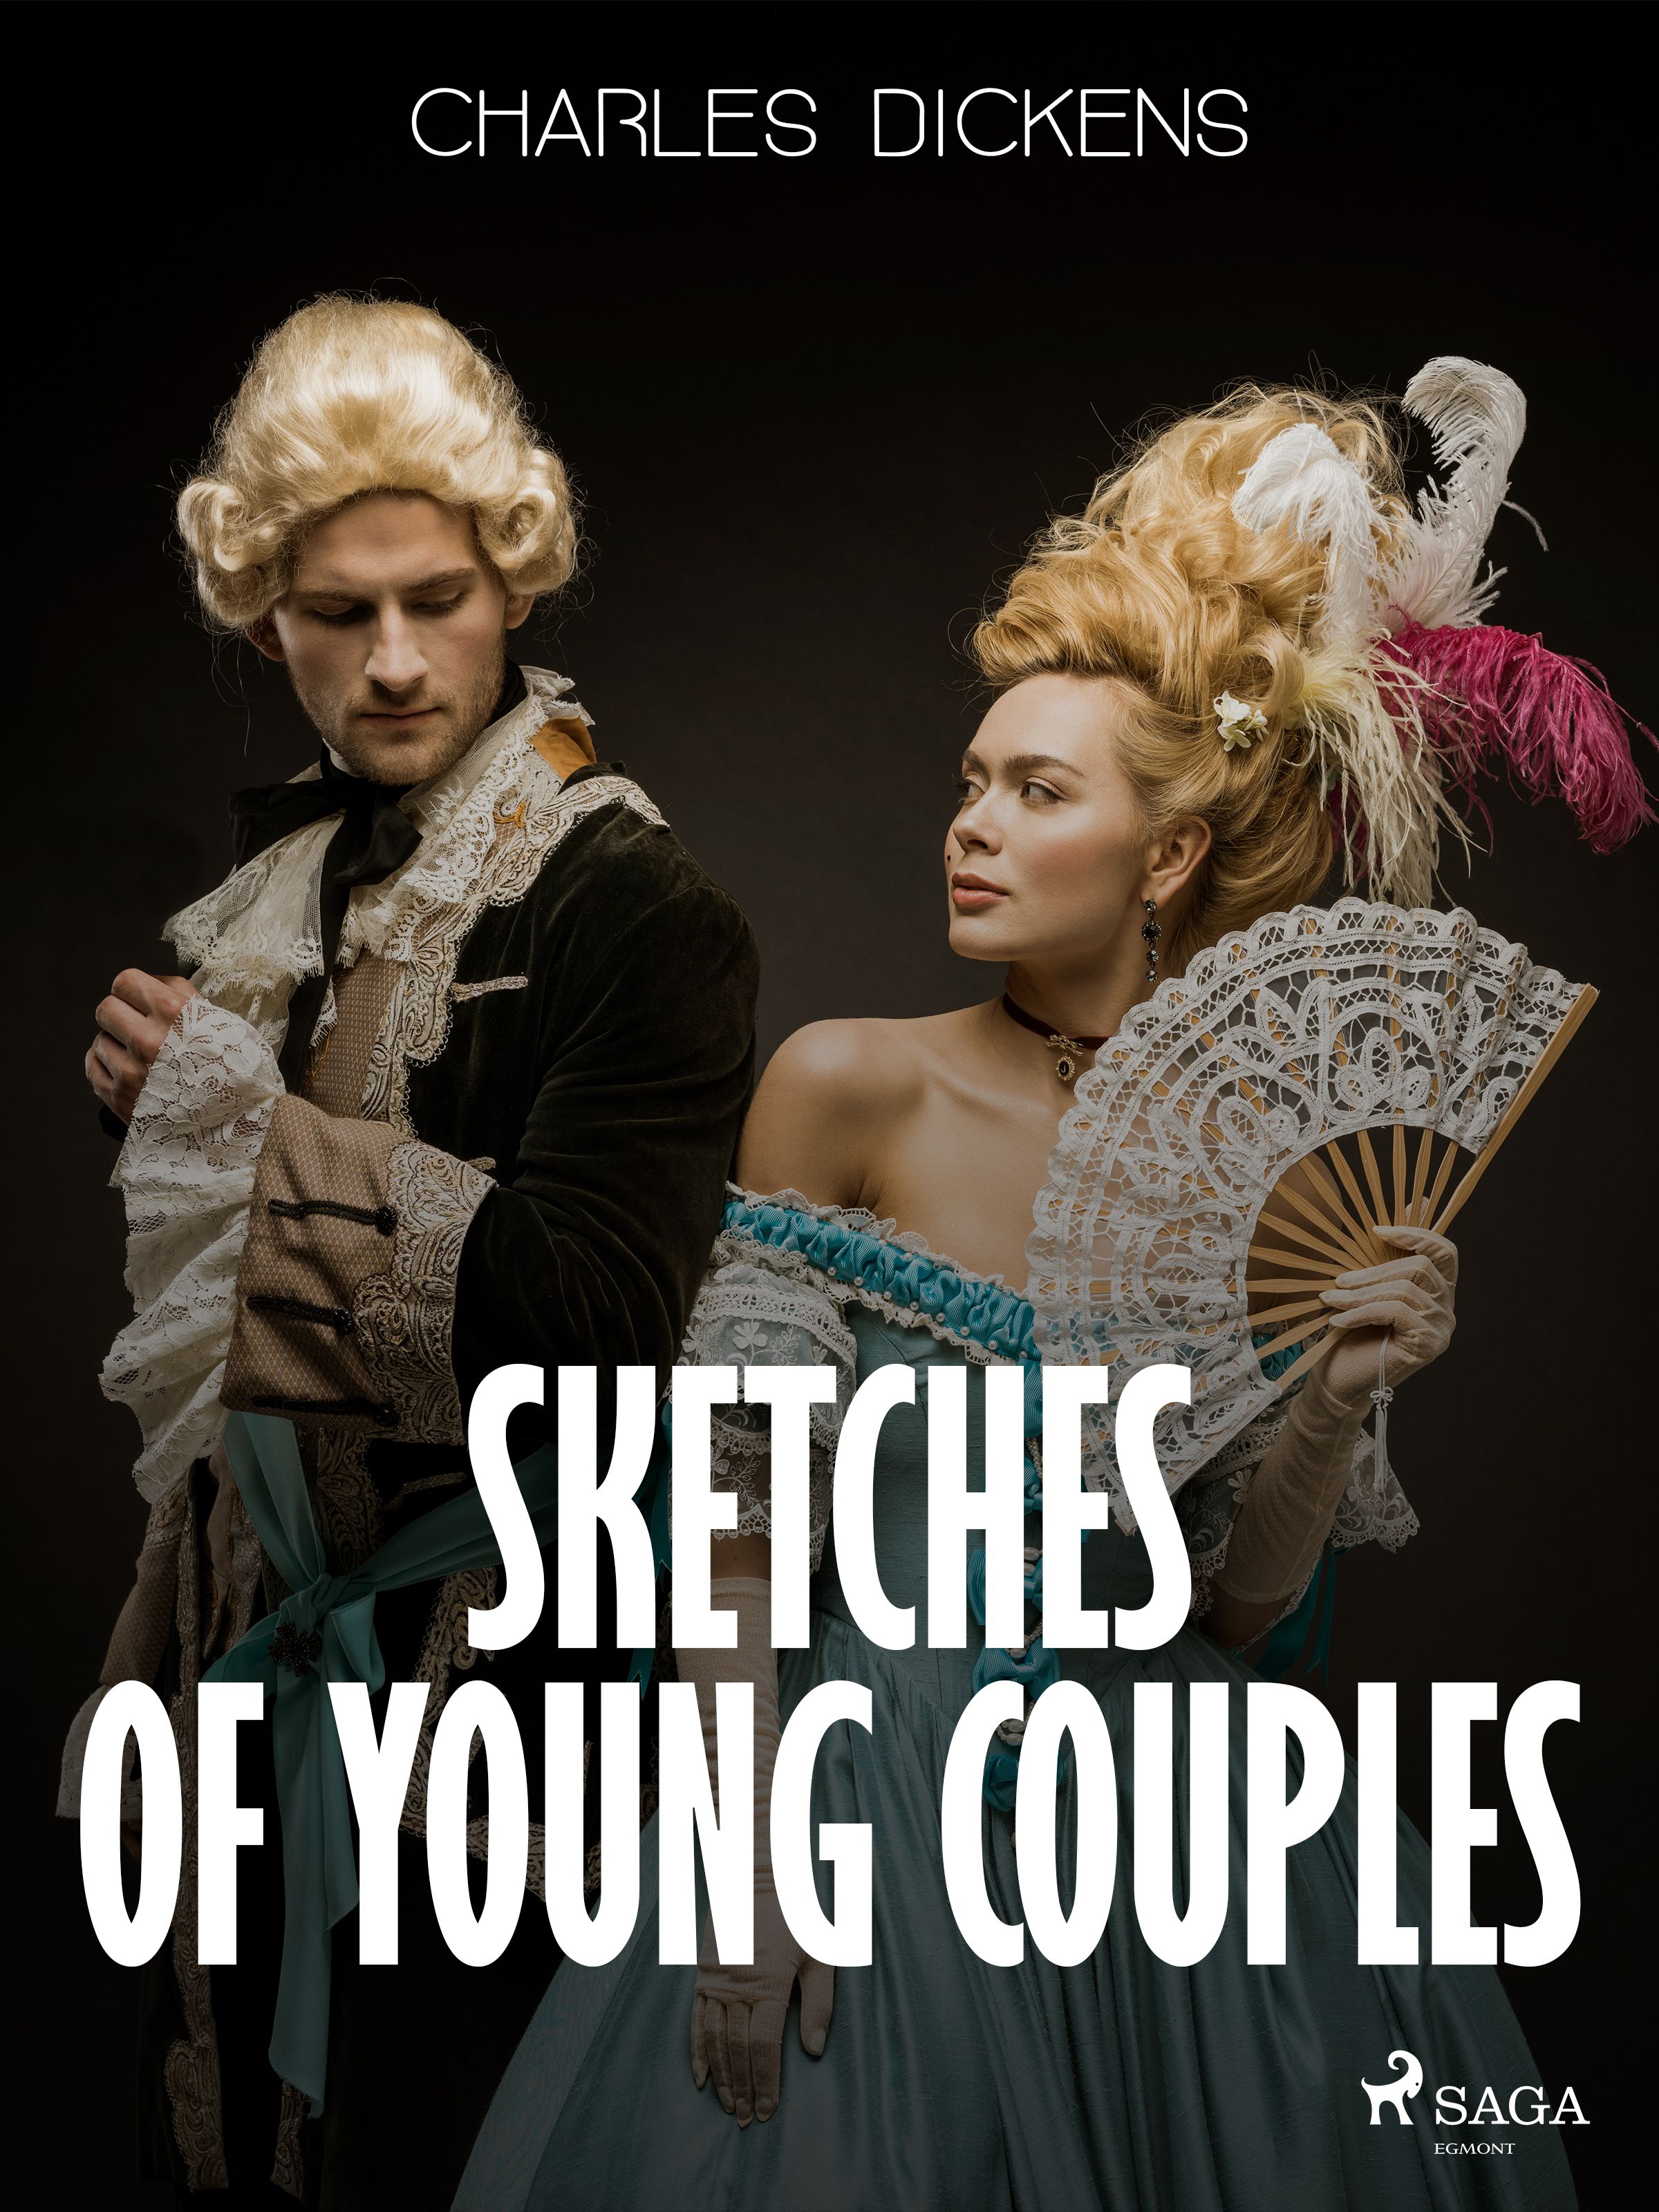 Sketches of Young Couples, e-bog af Charles Dickens